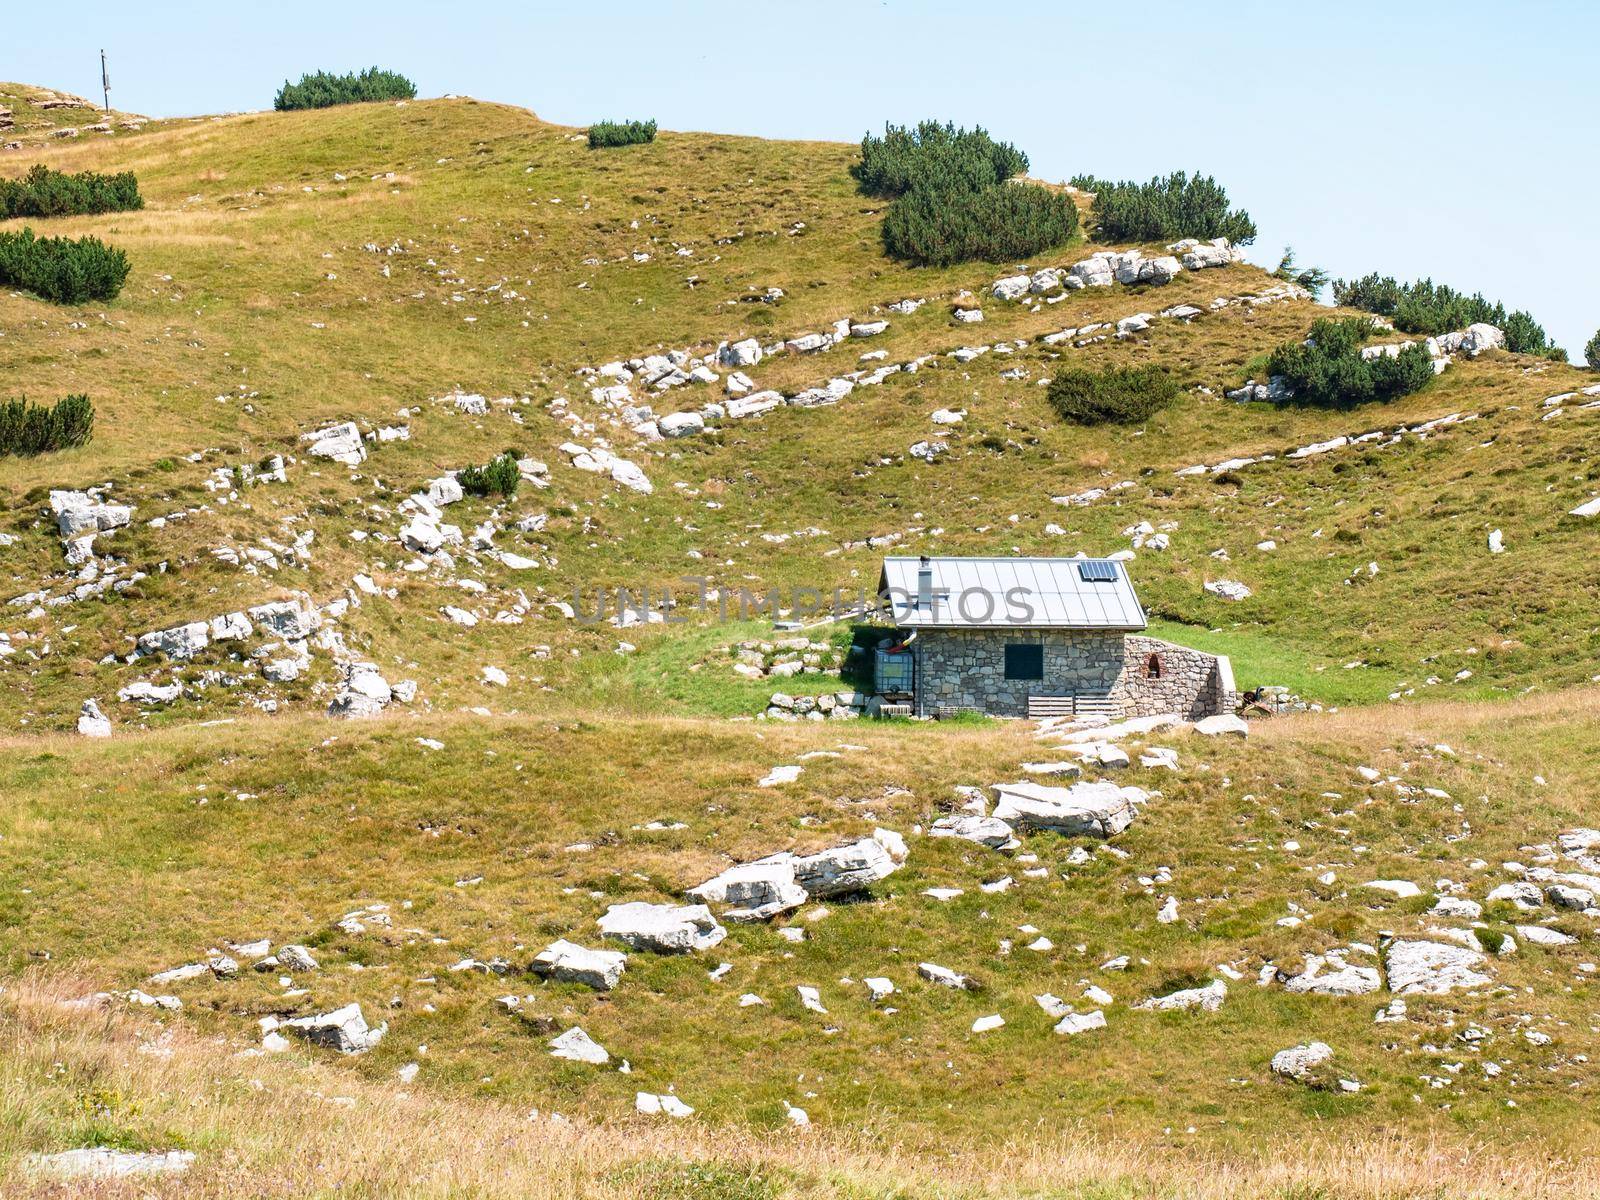 Stony holiday cottage hidden in meadow close to peak of Canfedin mountain 1865 metres high. Vezzano region, Trentino, Italy